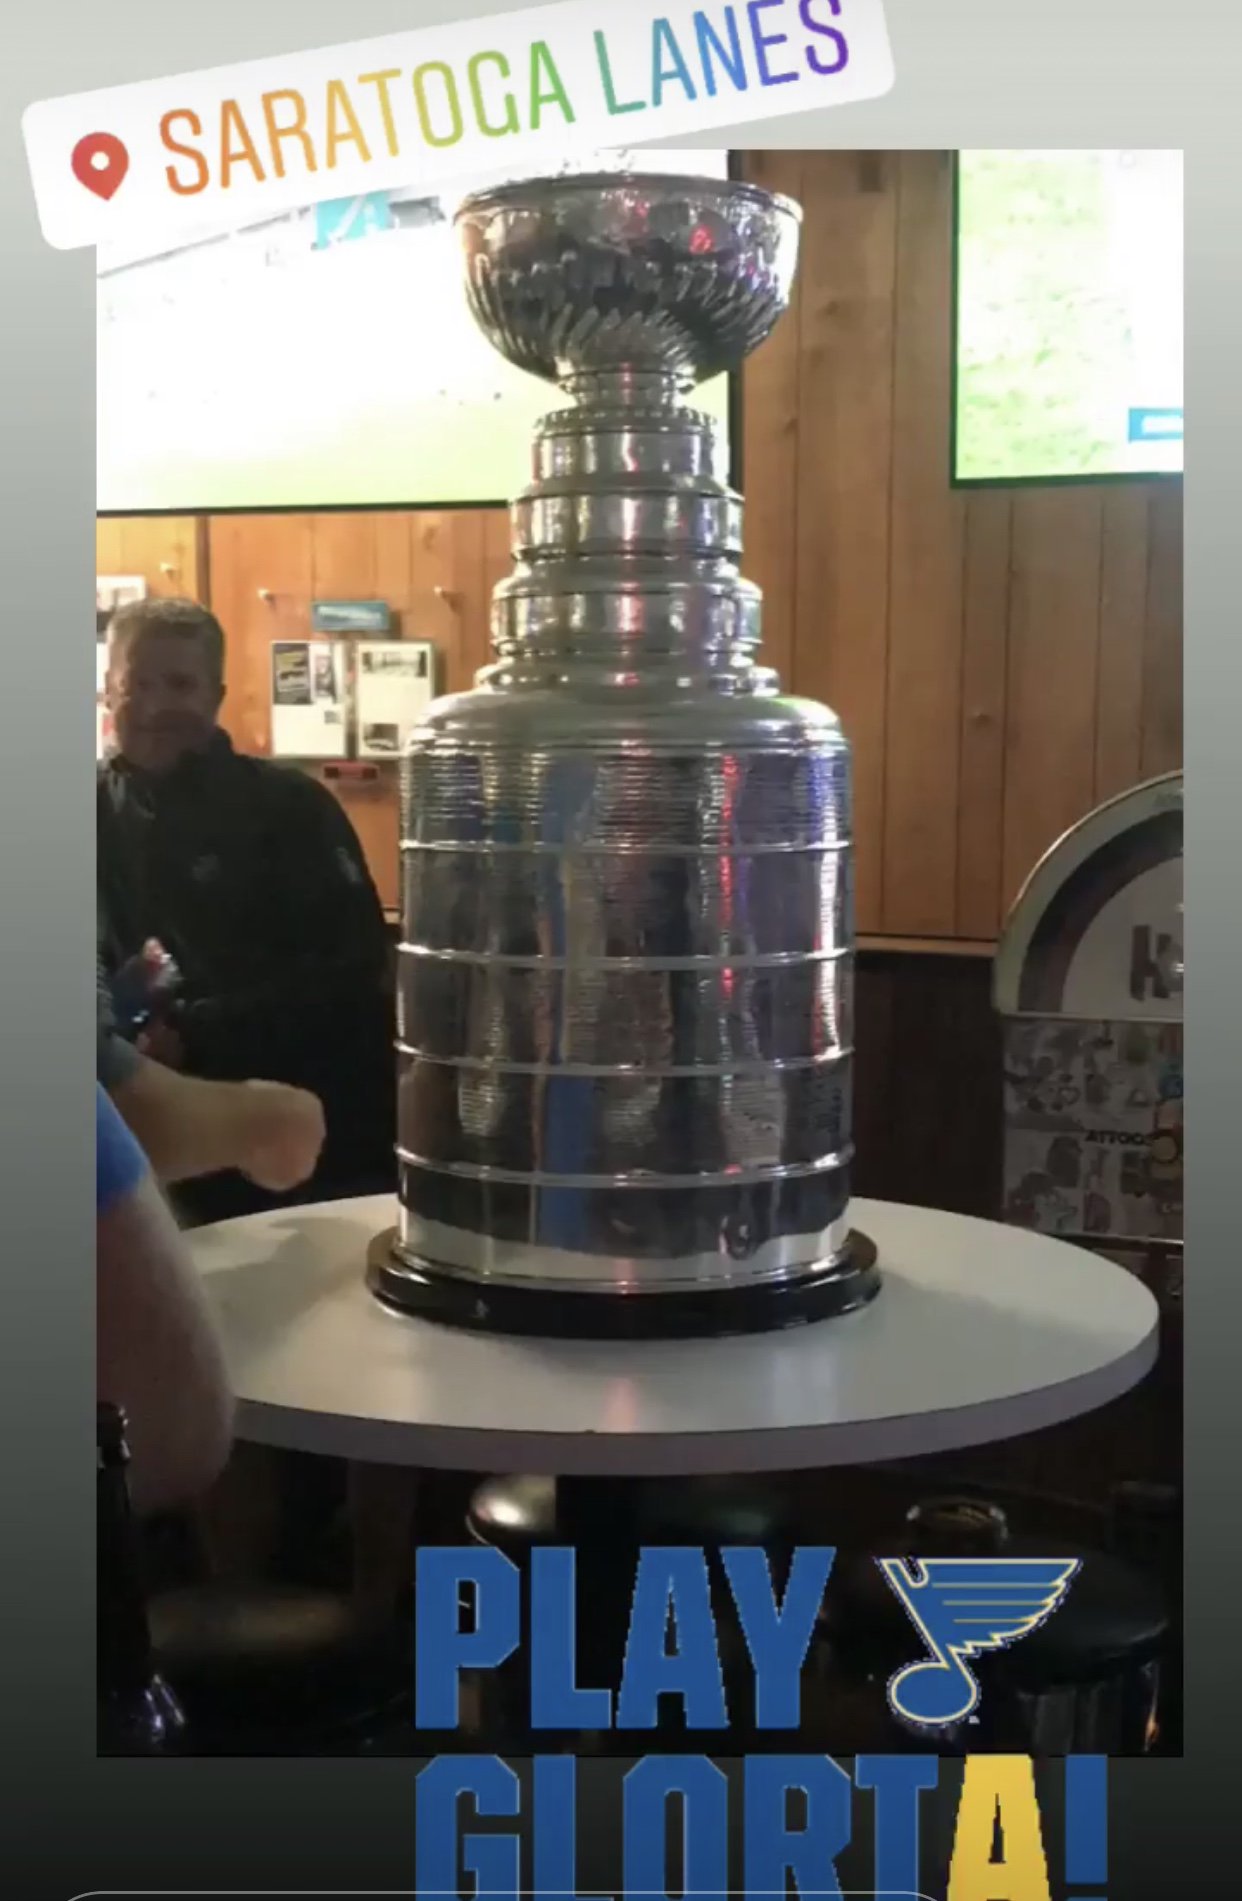 The Stanley Cup (@StanleyCup) / X